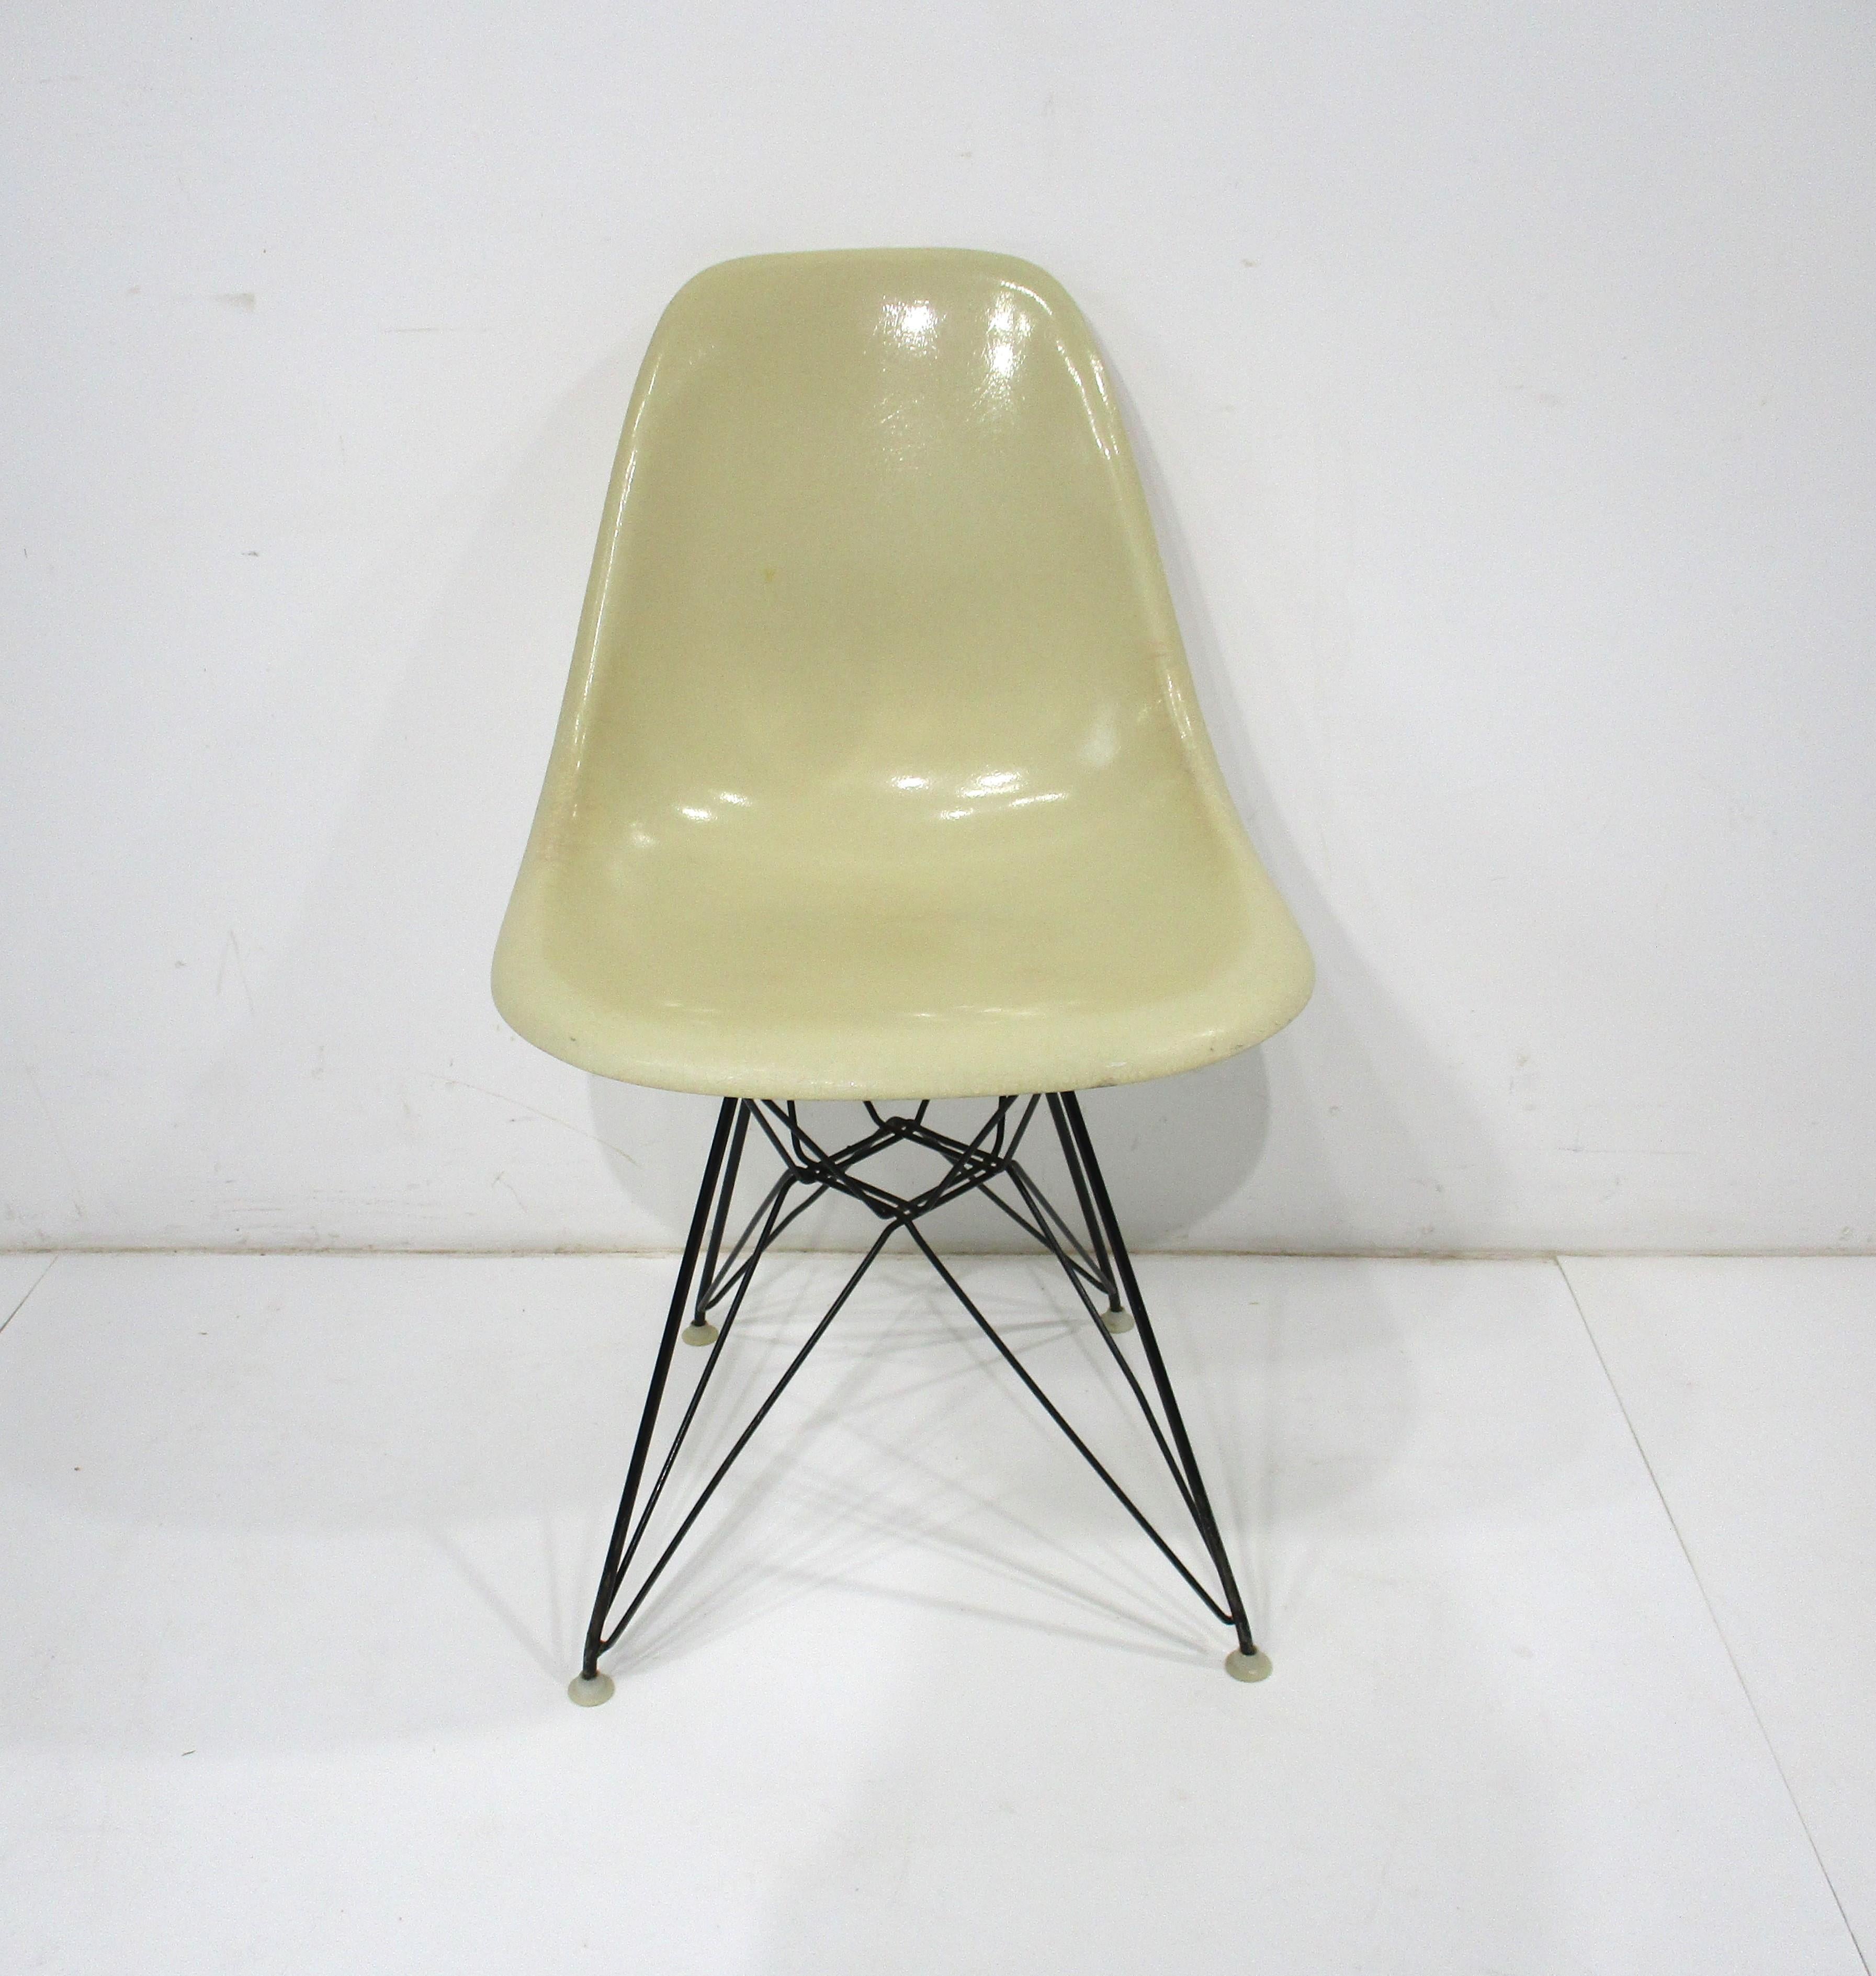 A parchment cream colored fiberglass desk chair with the satin black wire Eiffel tower base . The base has nylon foot pads to protect your floors and the slim and light look has great ergonomics for long periods of comfortable sitting . Designed by